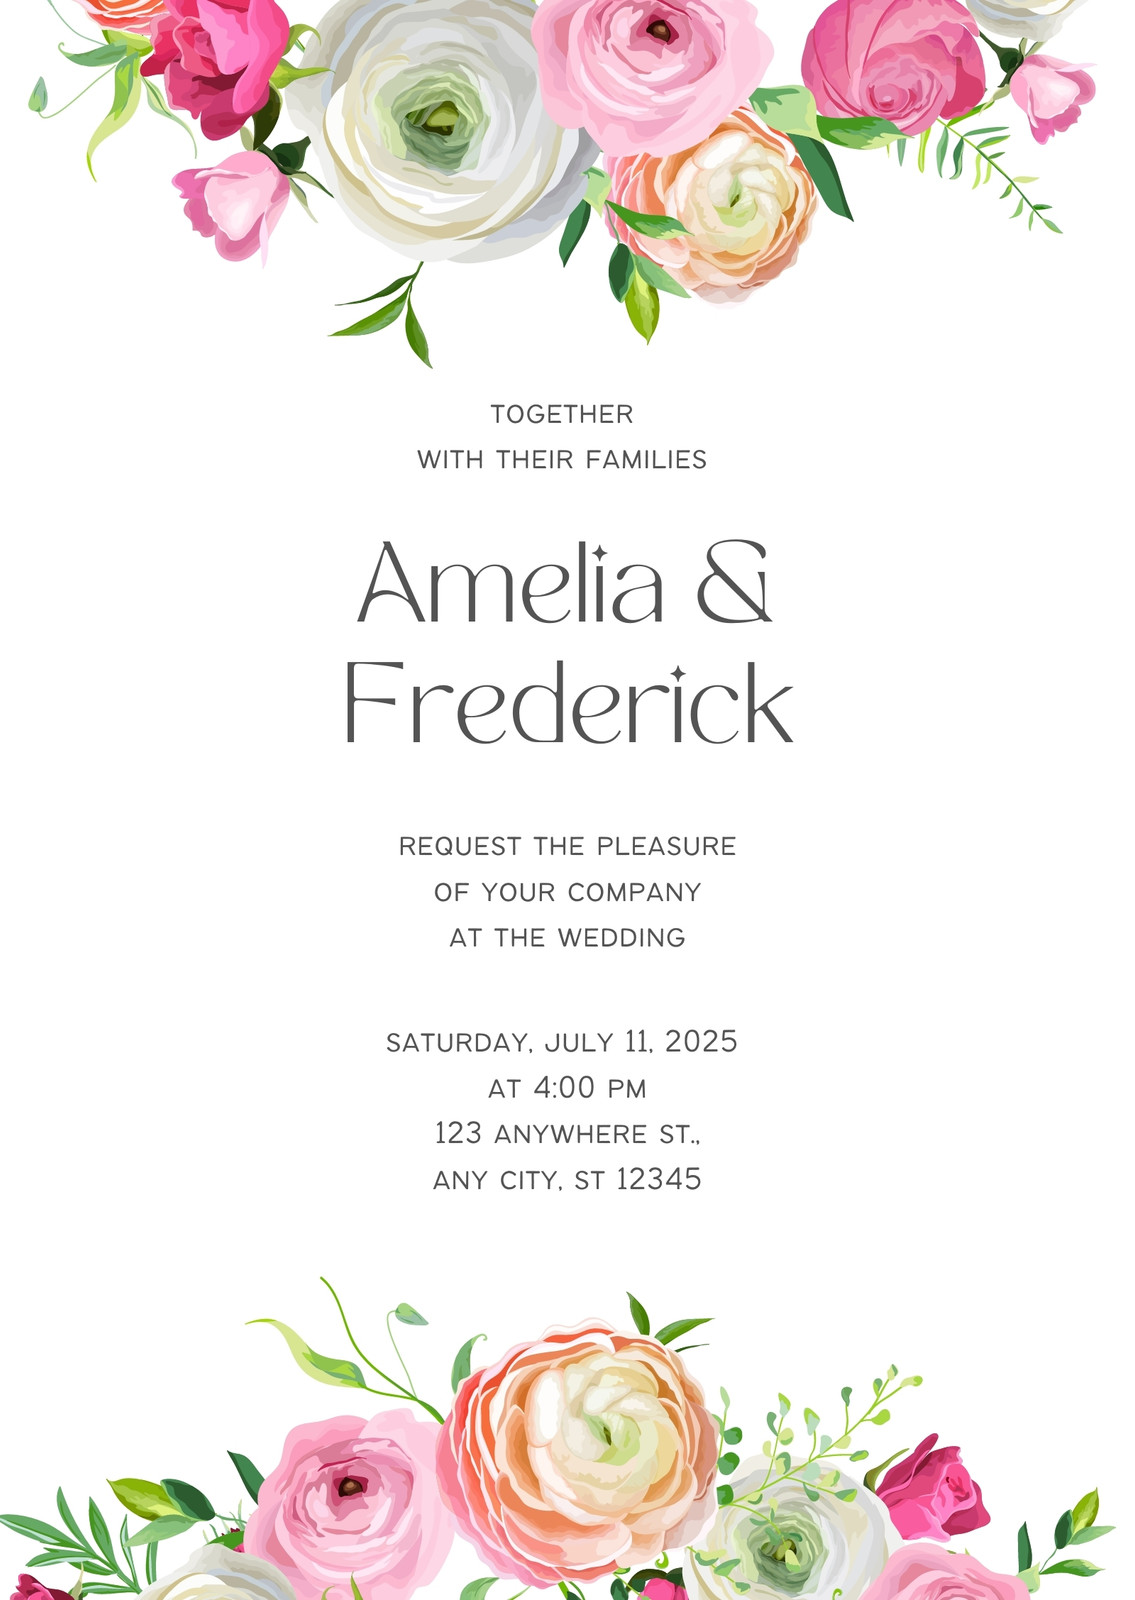 Free save the date card templates to edit and print